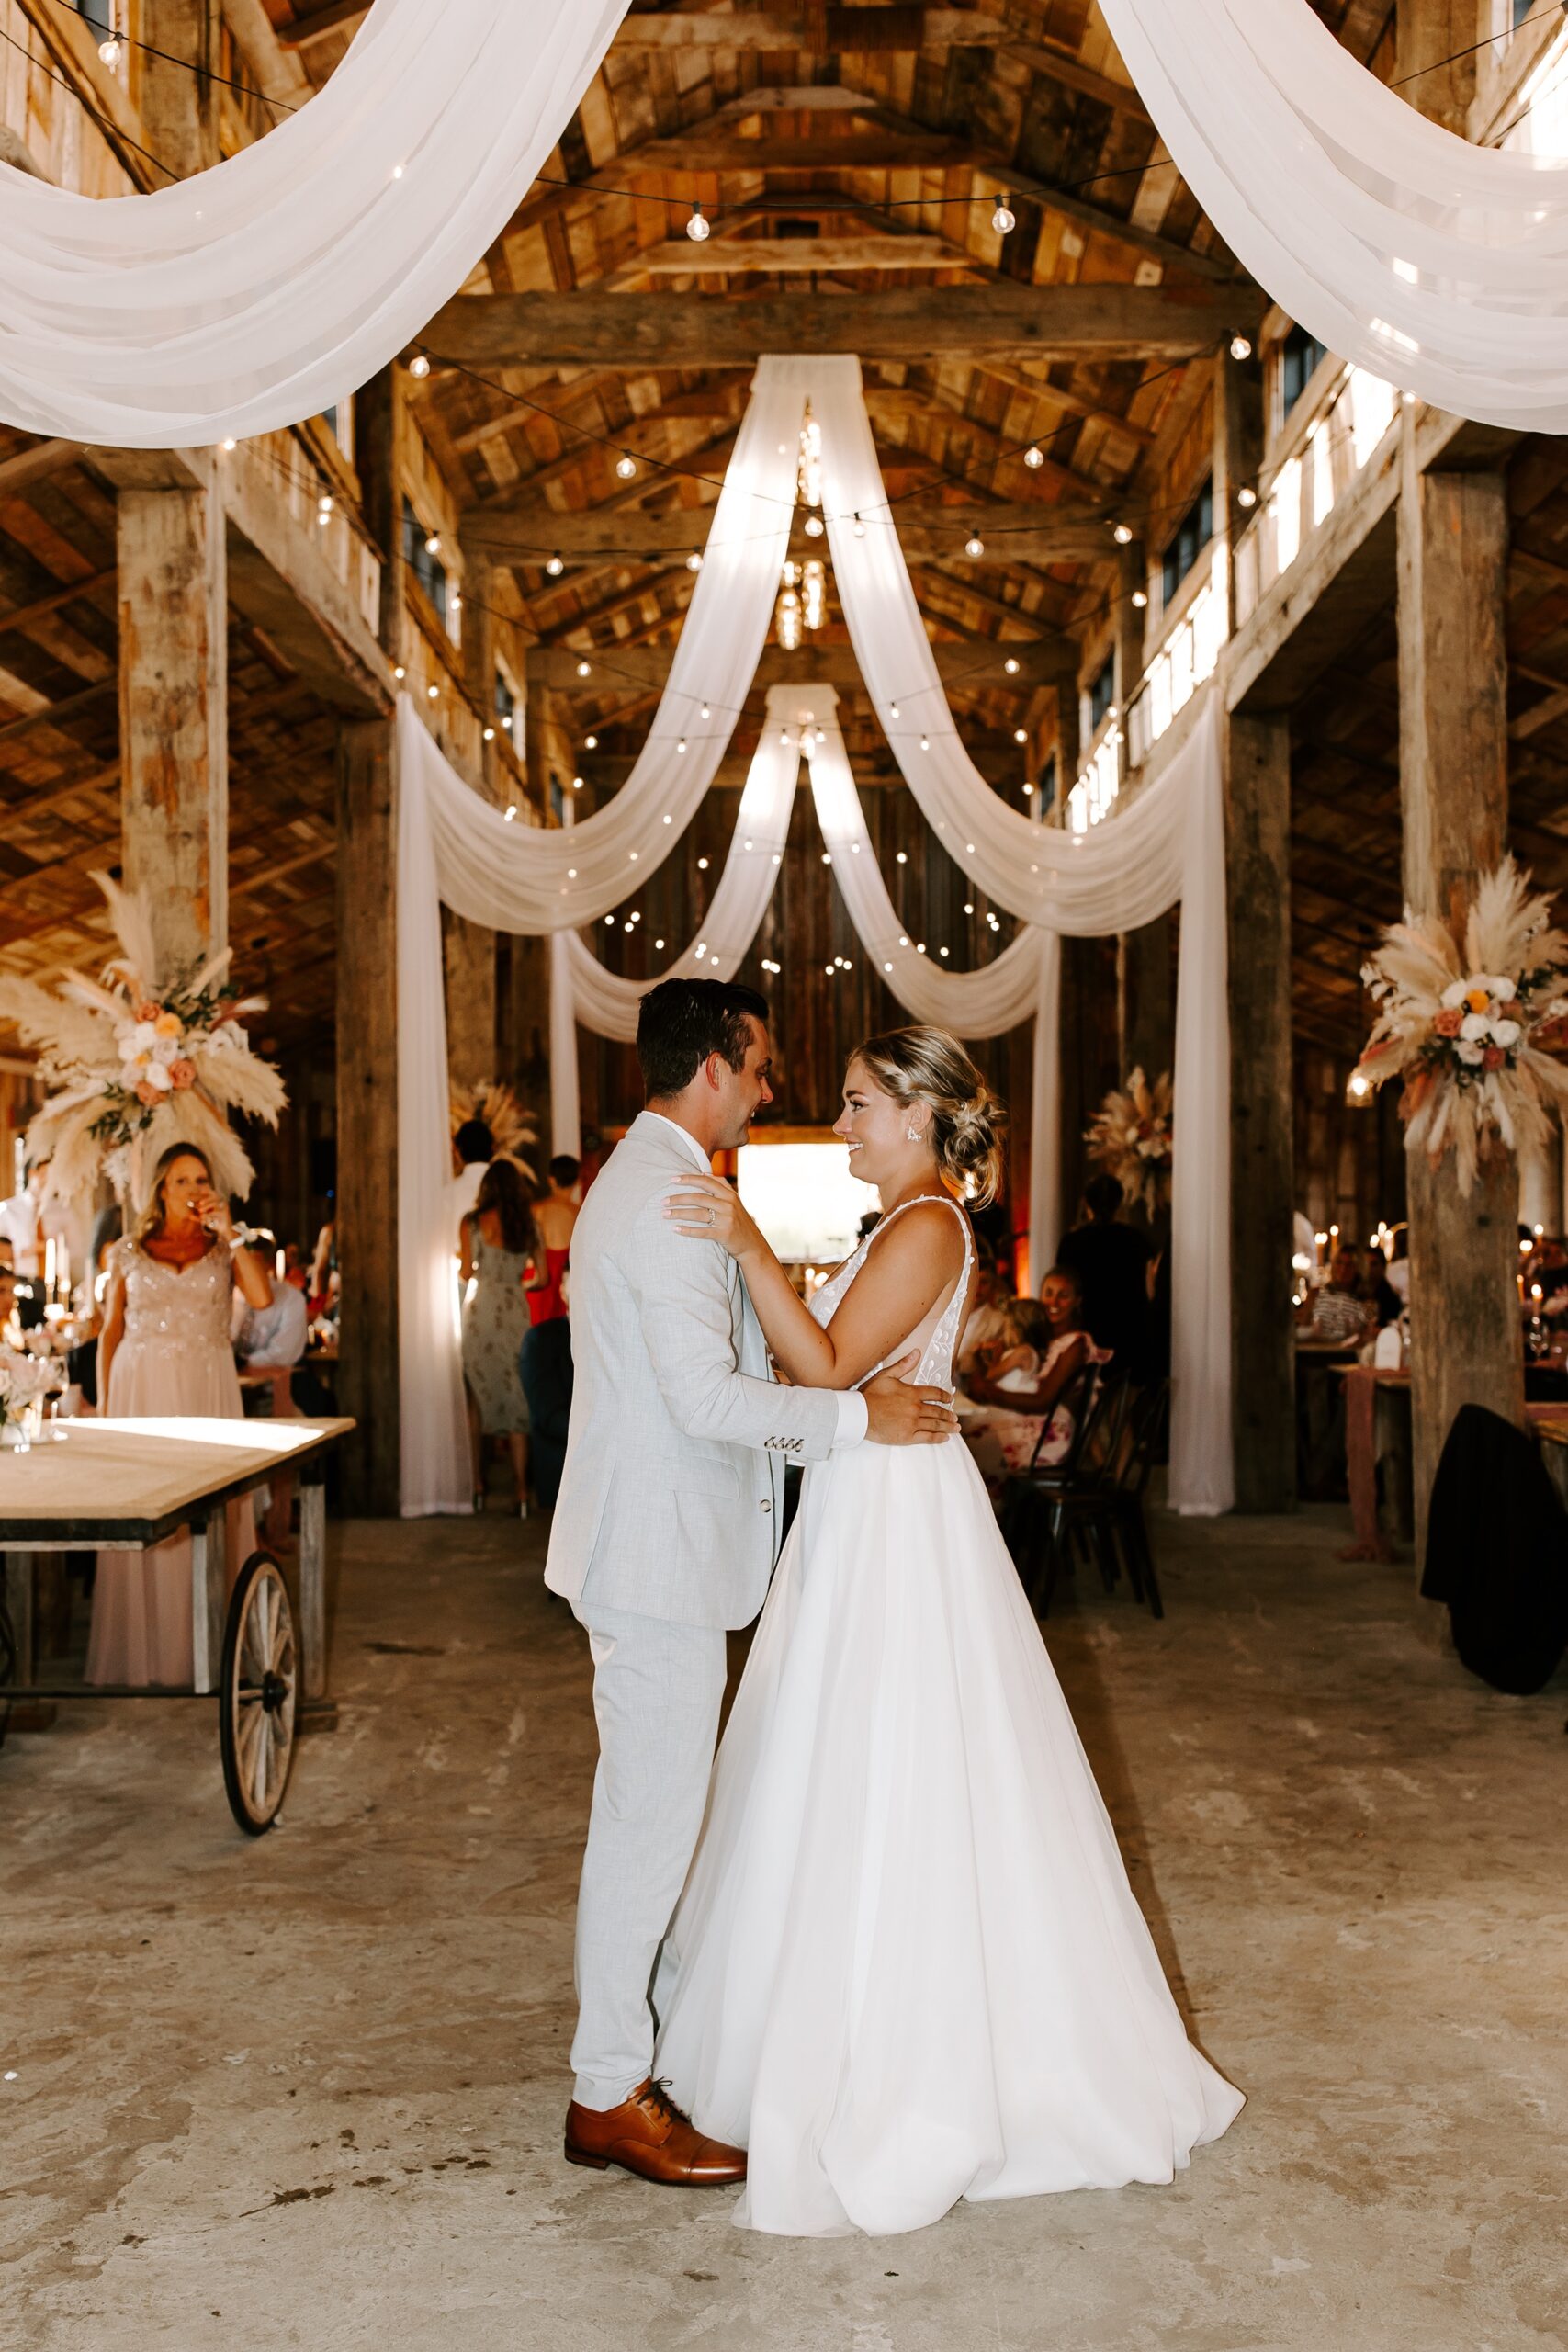 Bride and groom first dance at Mountain Star Estate wedding reception